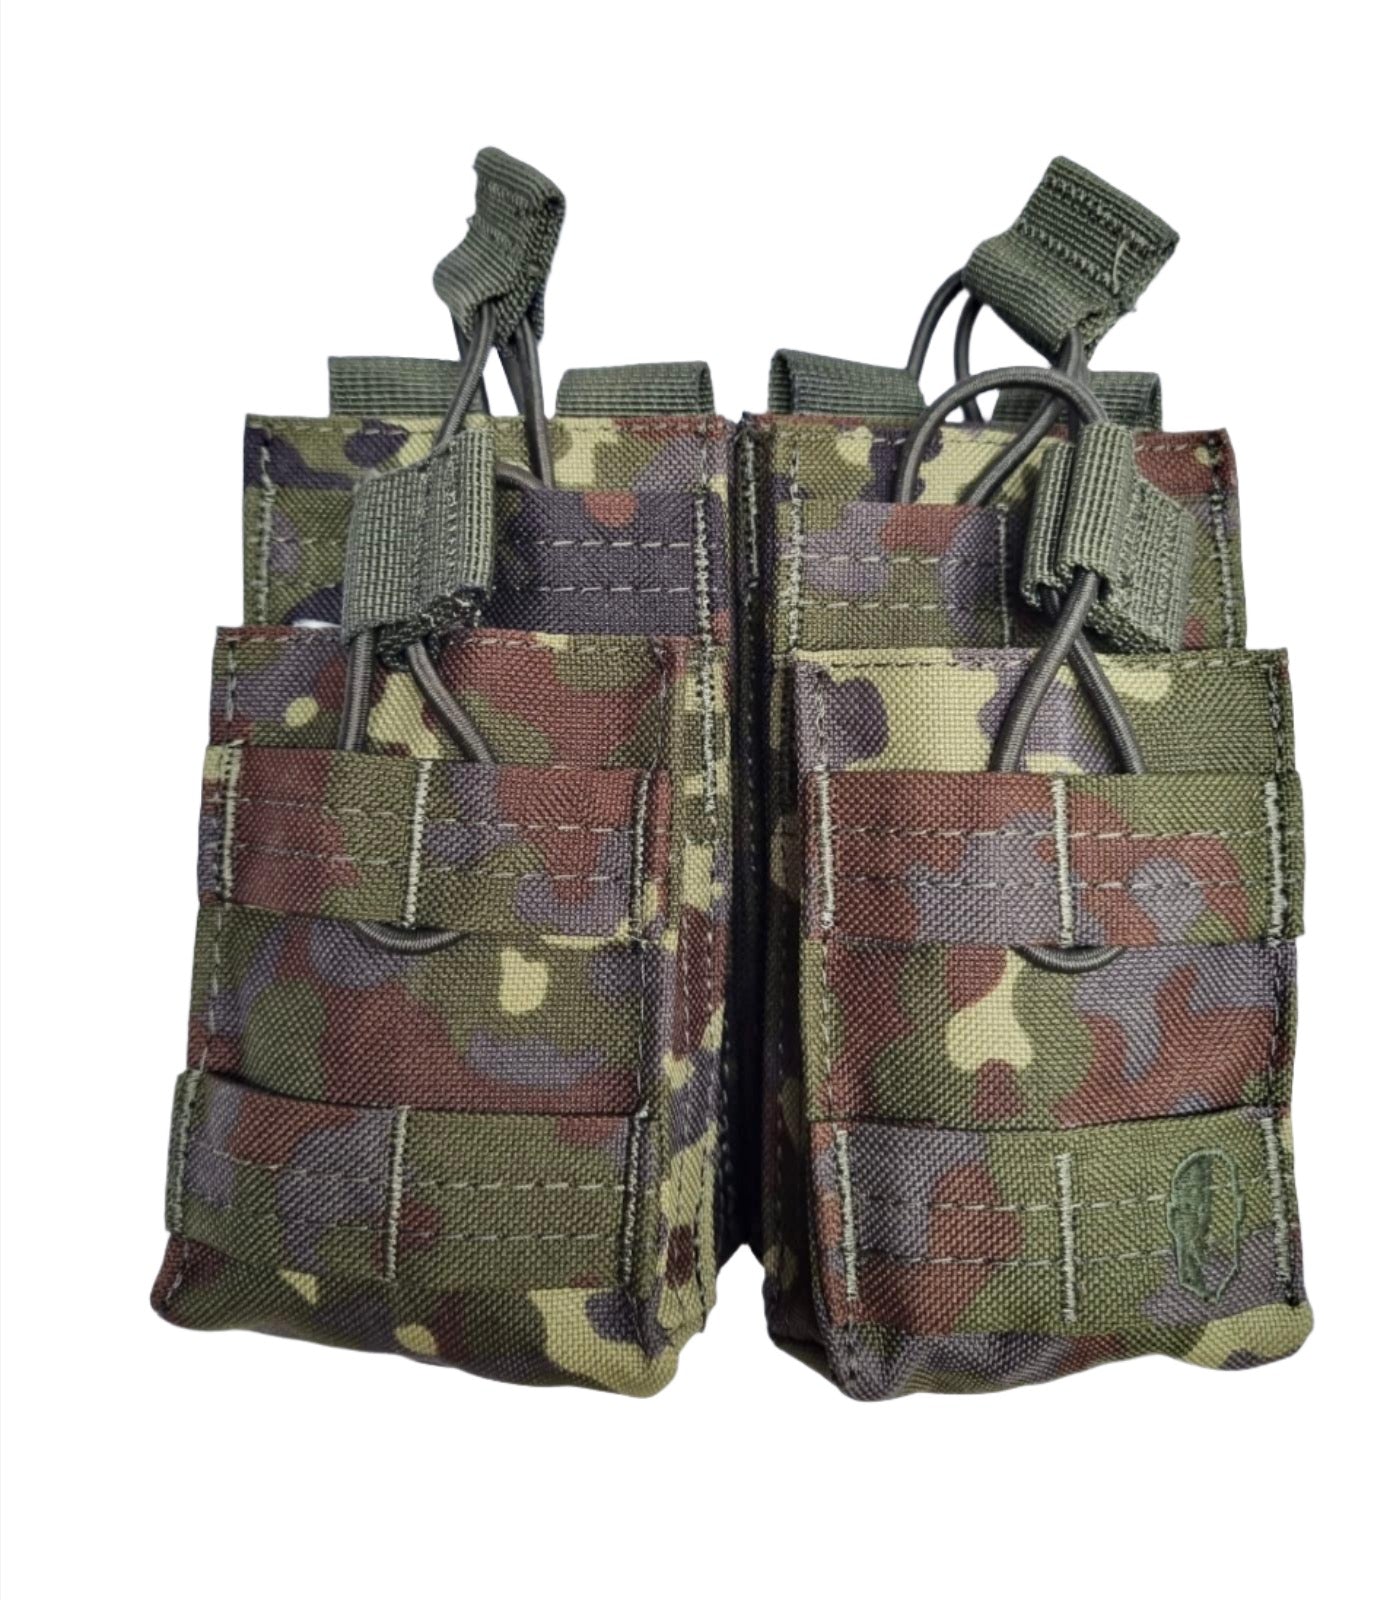 SHS - 996 STACKER OPEN-TOP MAG POUCH DOUBLE COLOUR GERMAN FLECTARN.